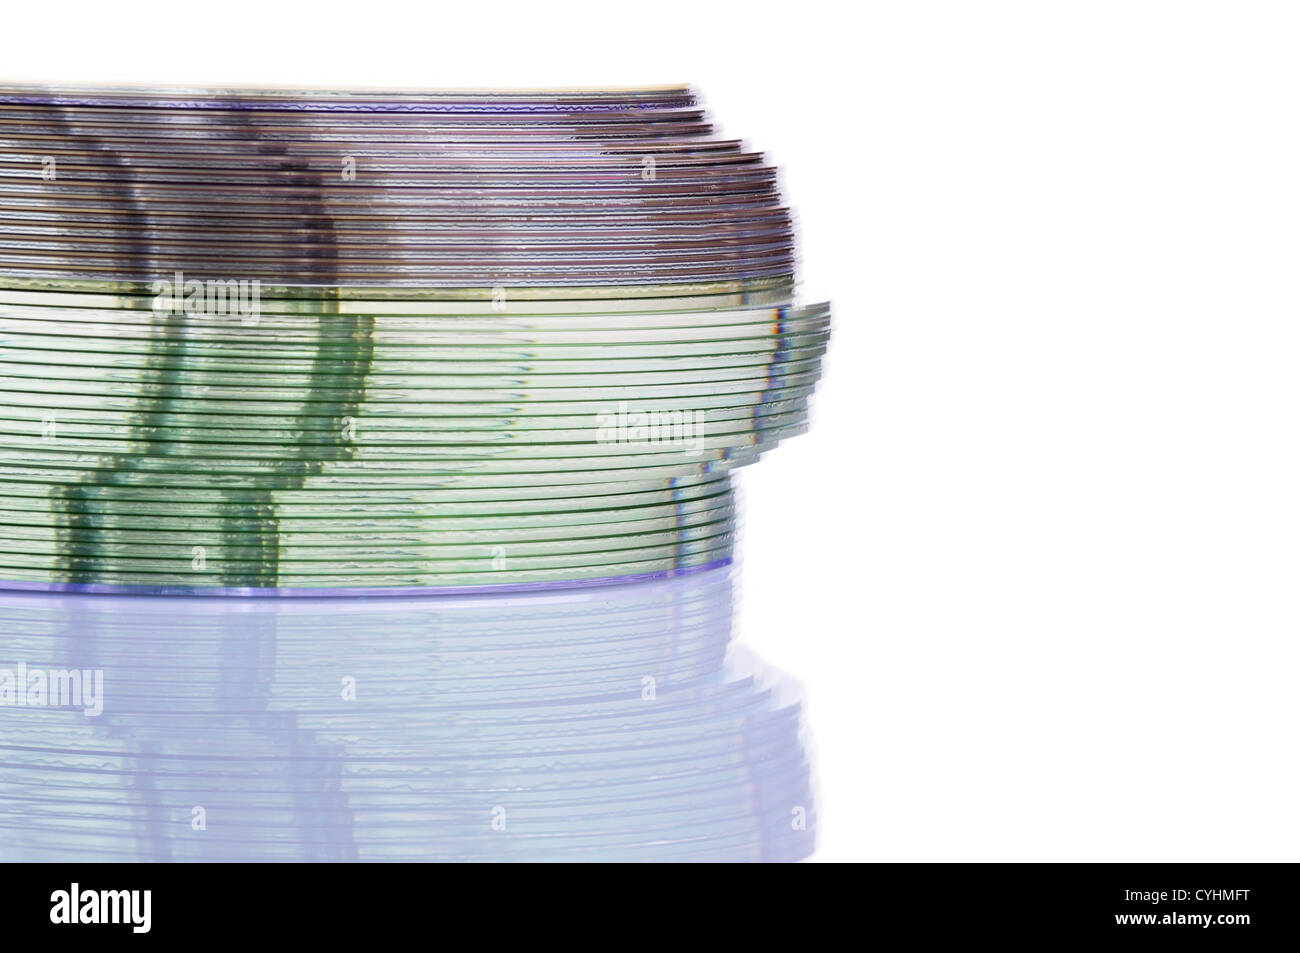 Close up view of a CD/DVD stack on a mirror Stock Photo